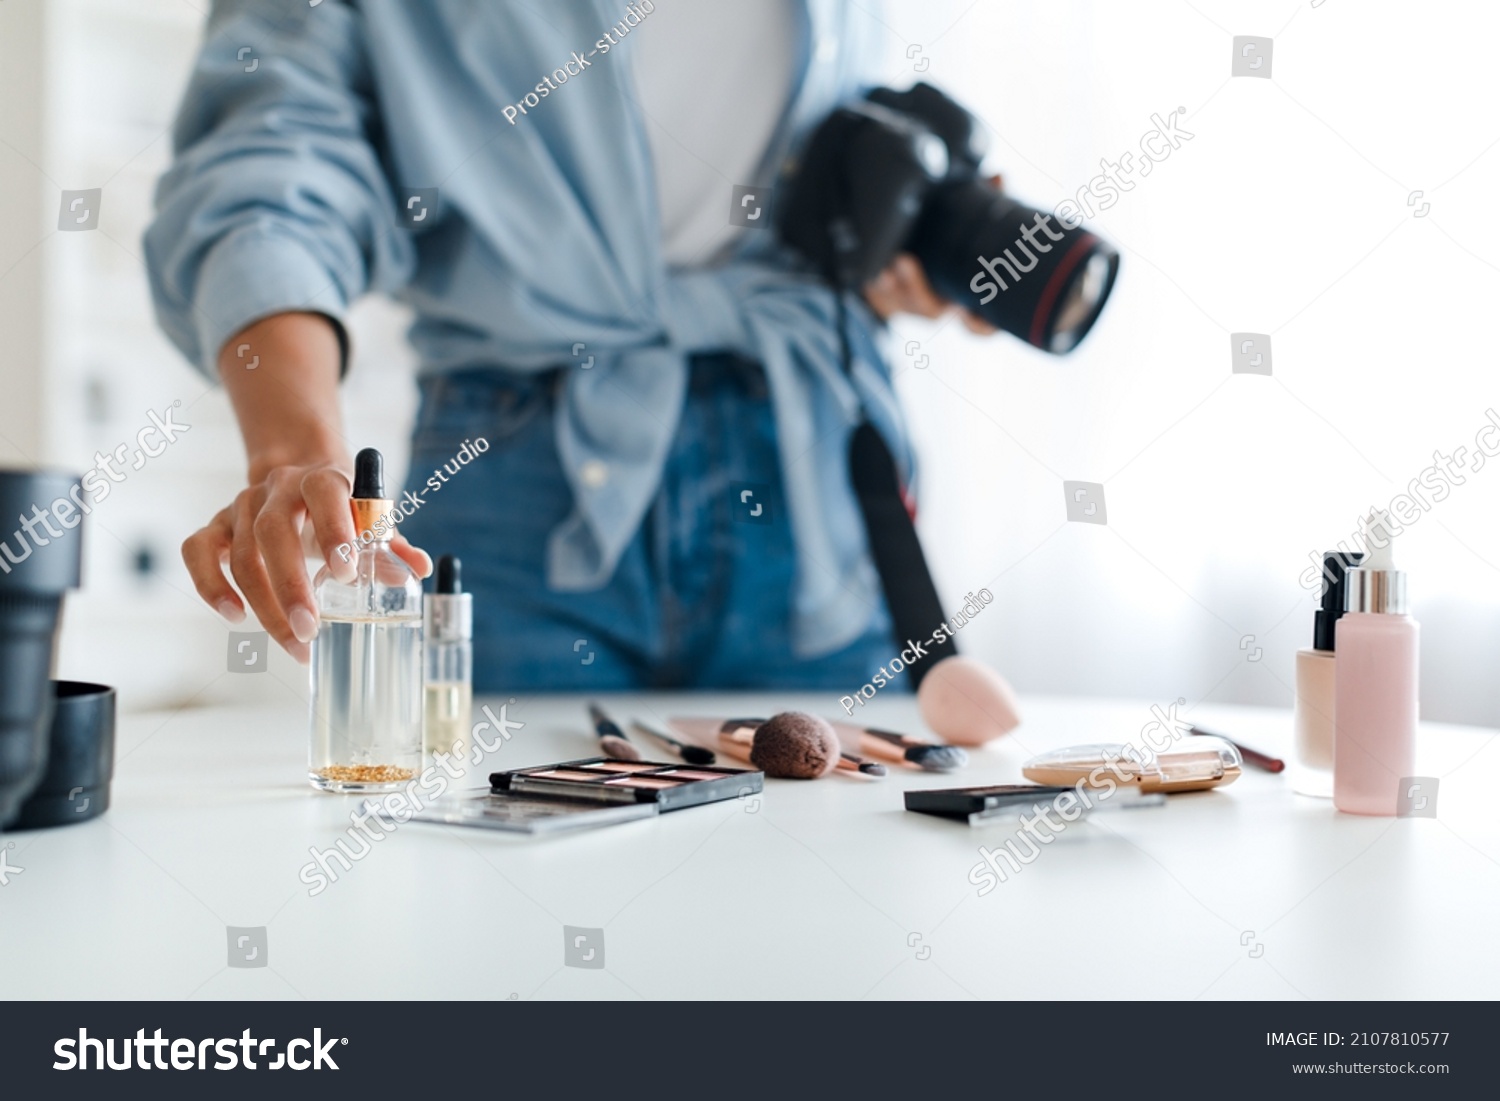 Object Photography. Unrecognizable Photographer Lady Putting Cosmetic Products On Table Making Composition And Taking Photo Of Makeup Background, Holding Camera Indoor. Selective Focus, Cropped #2107810577